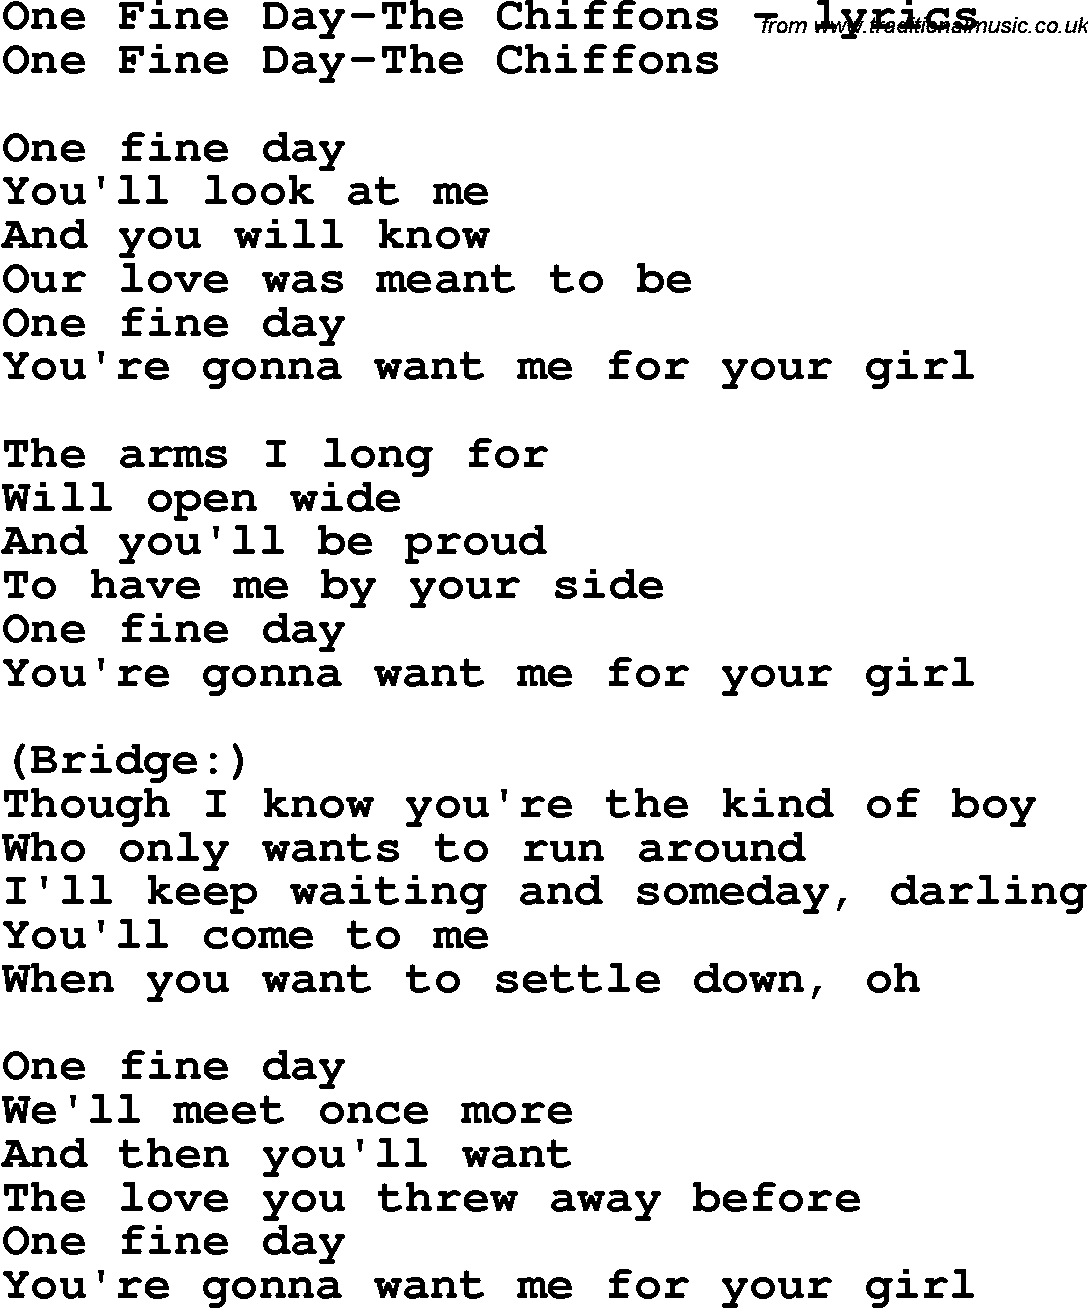 Love Song Lyrics for: One Fine Day-The Chiffons